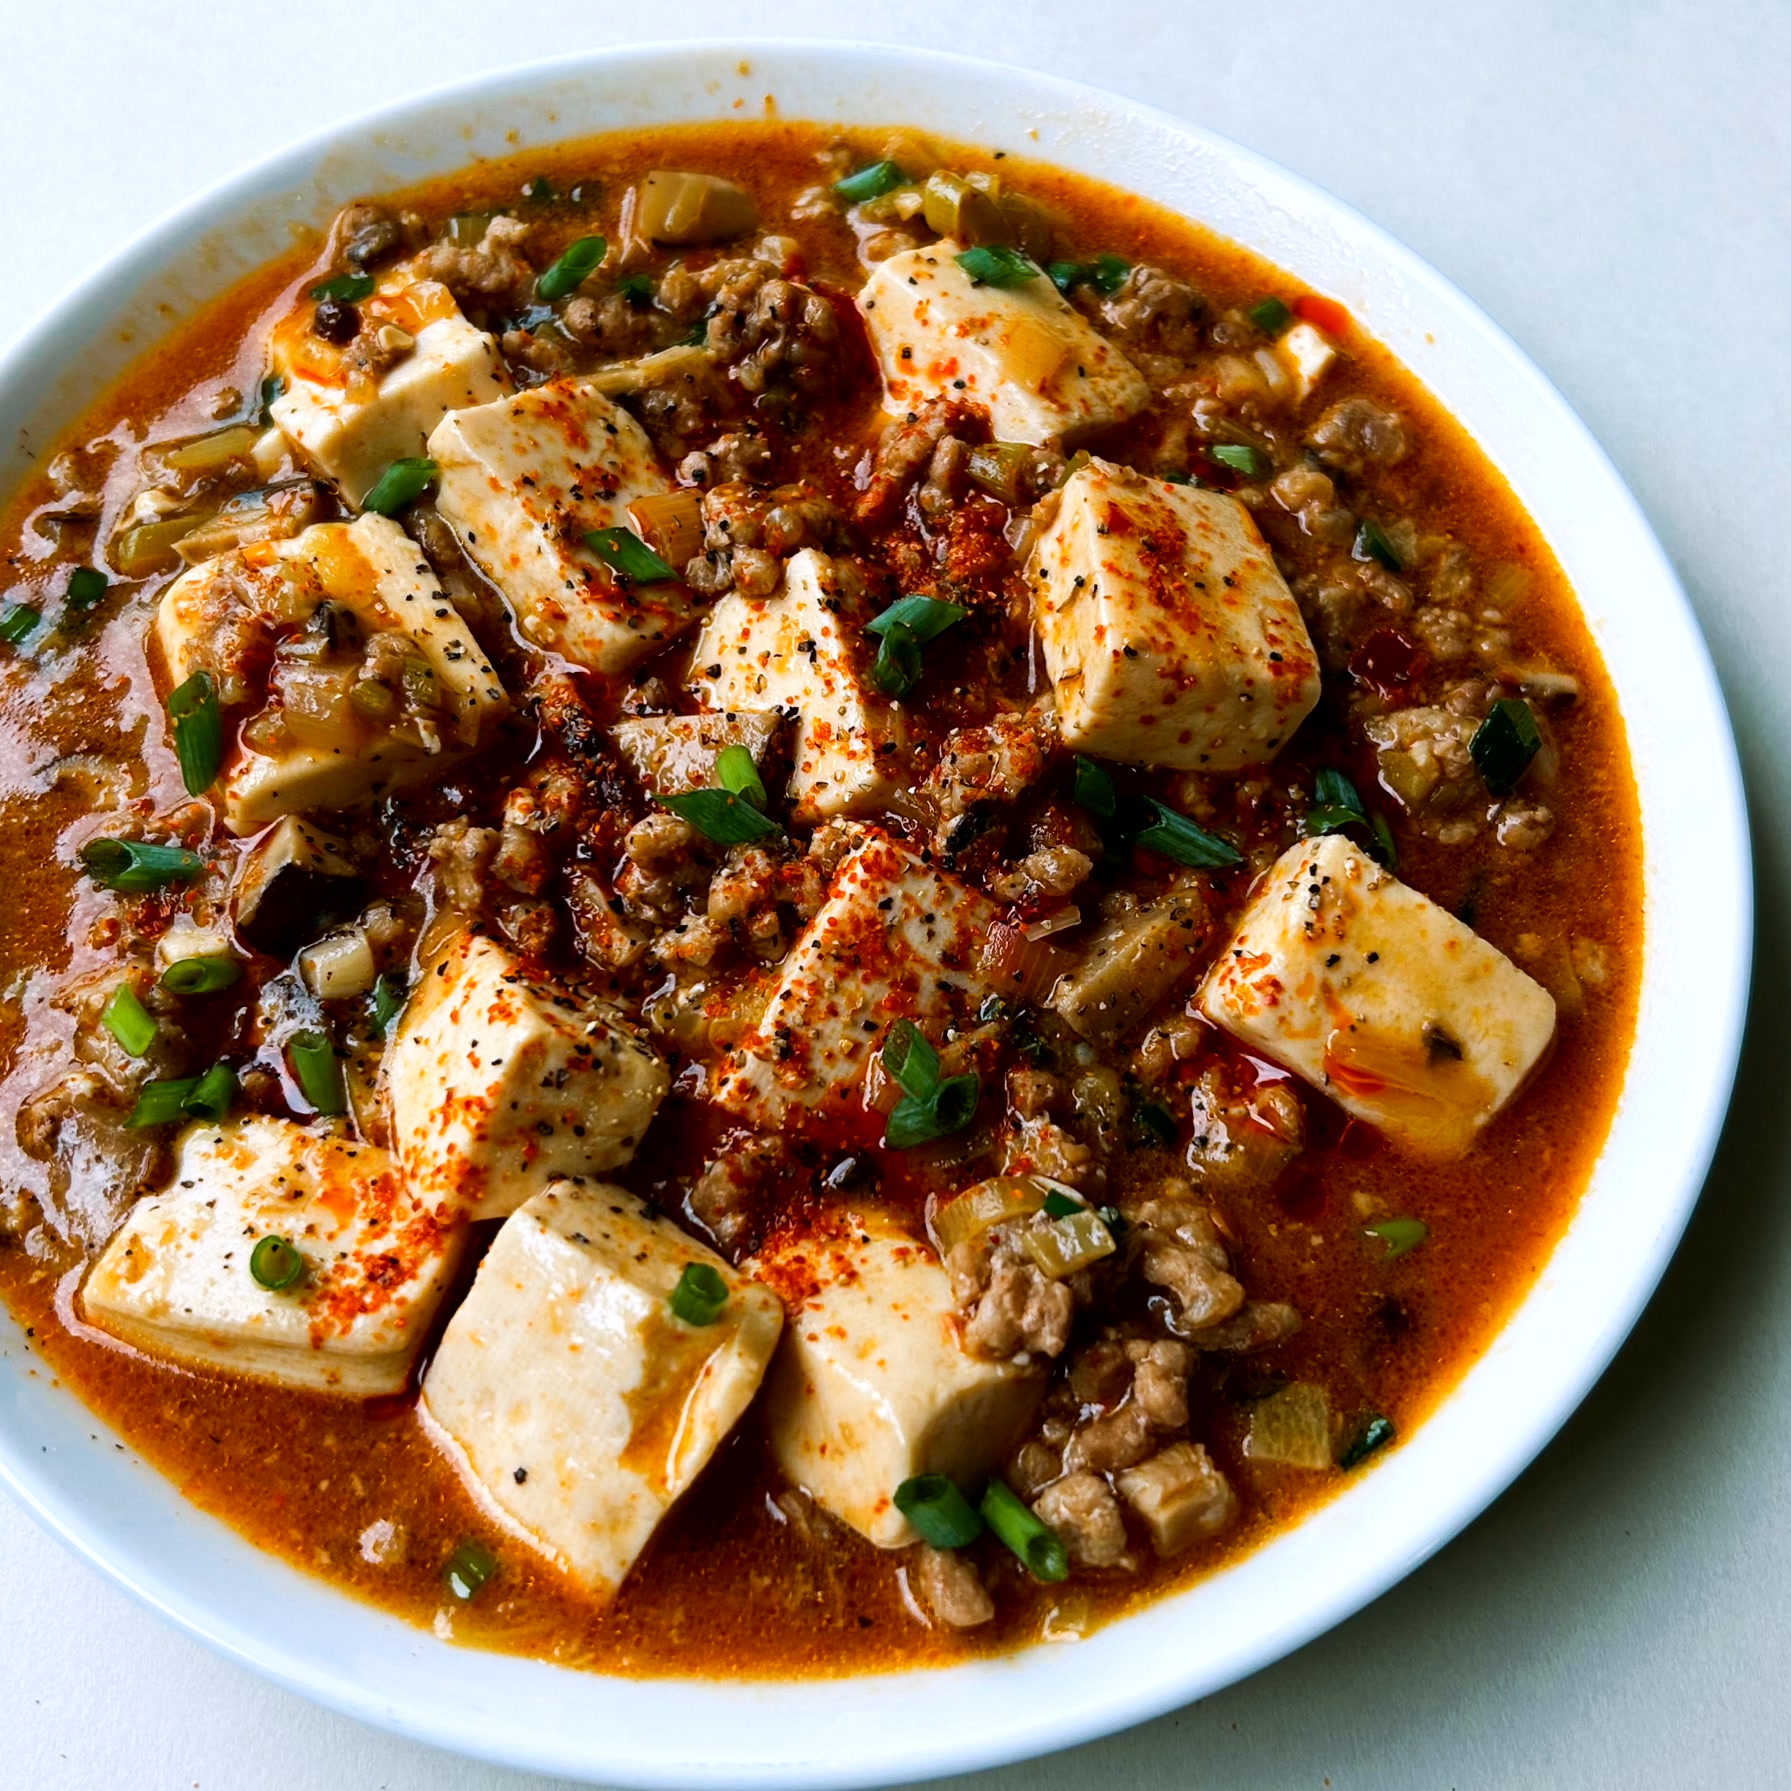 This dish is made by stir-frying minced pork with plenty of spices and simmering it with tofu.